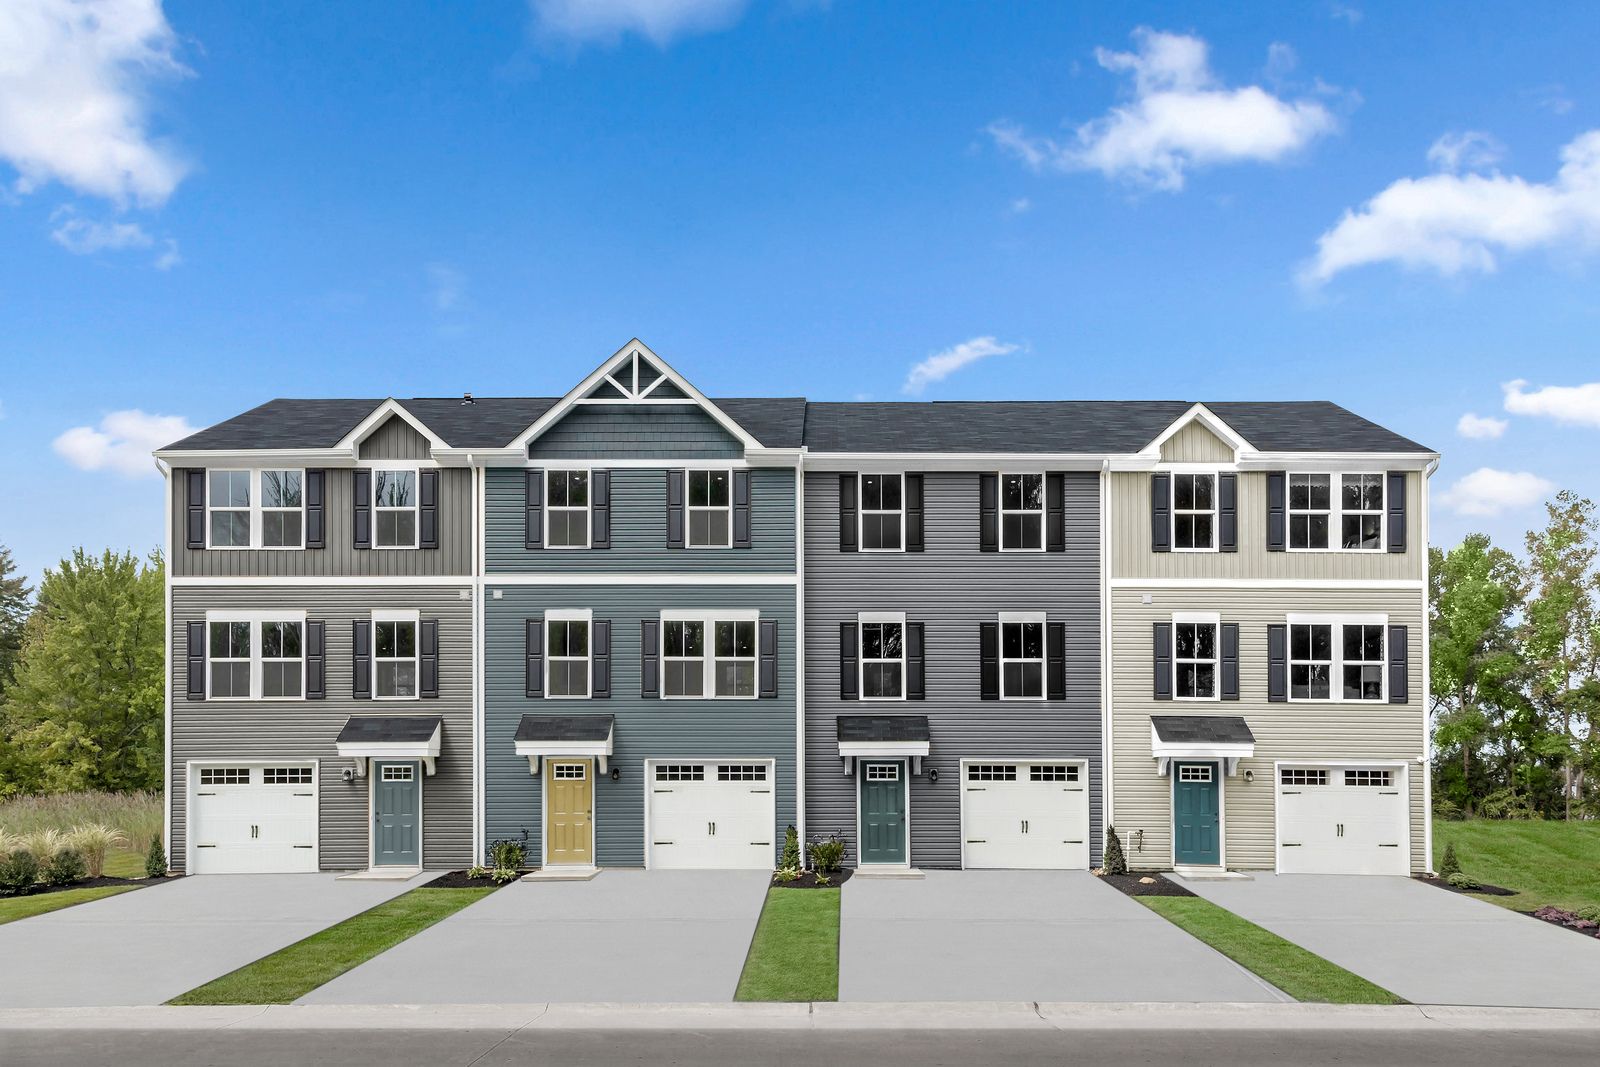 The most affordable new homes in the area